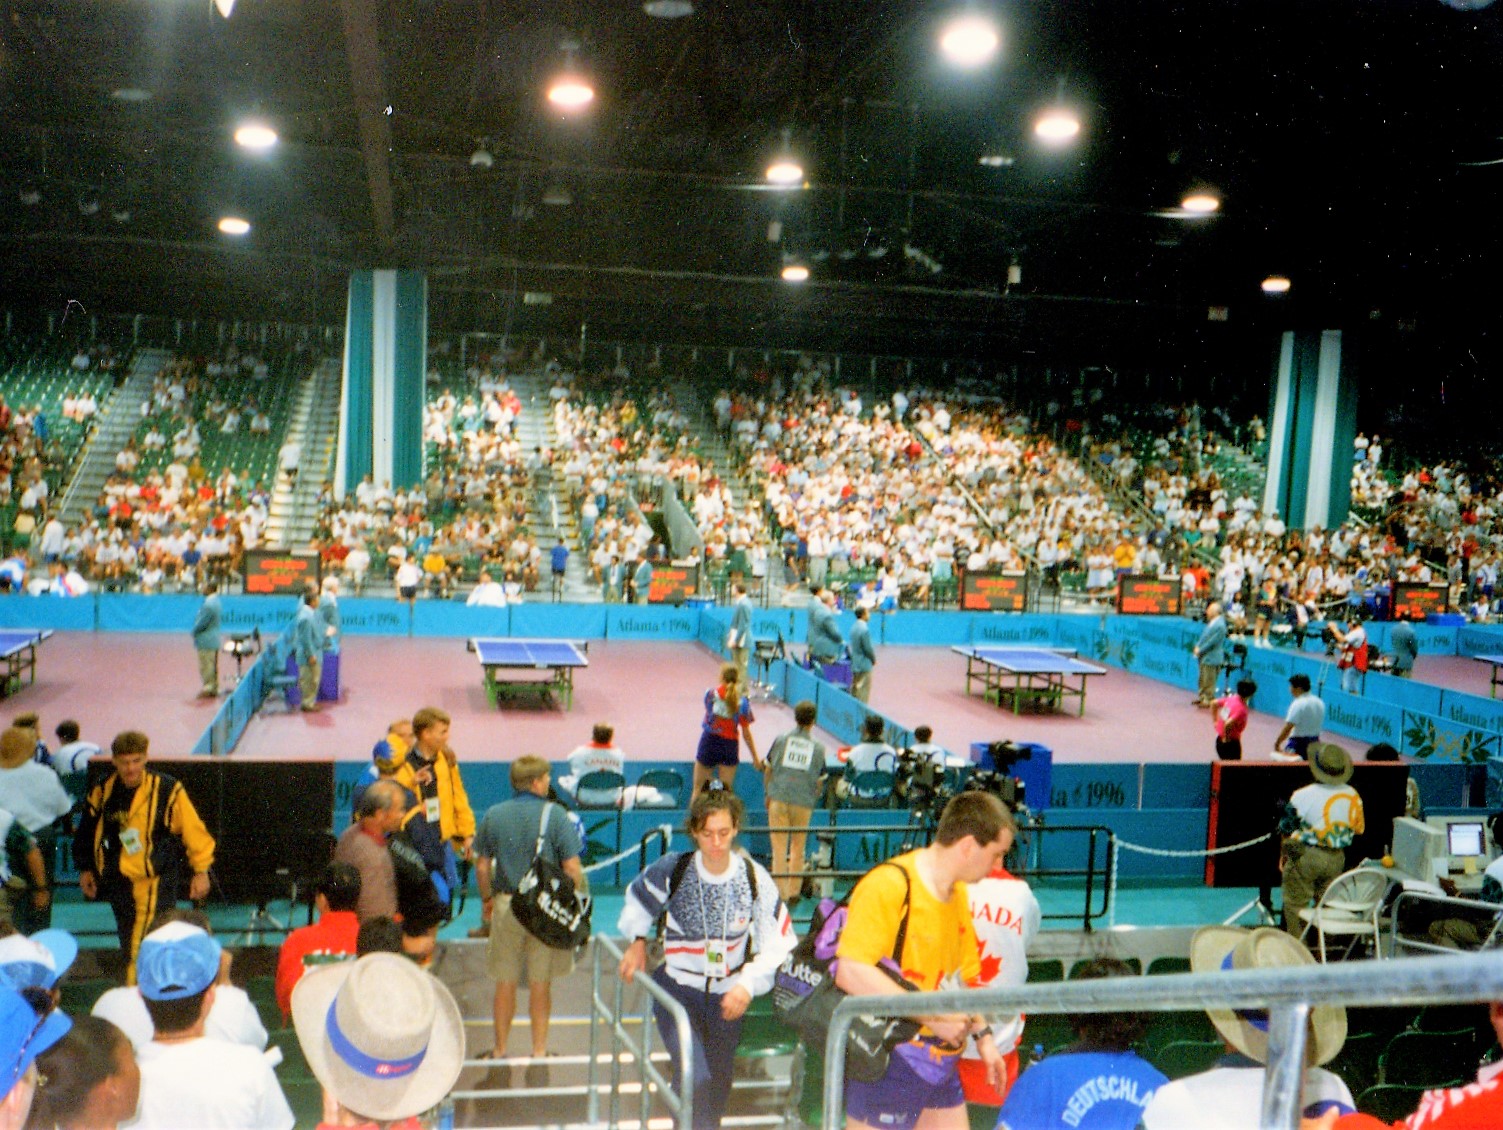 Table tennis competition at the Georgia World Congress Center during the Atlanta Olympics. (Sheila S. Hula)